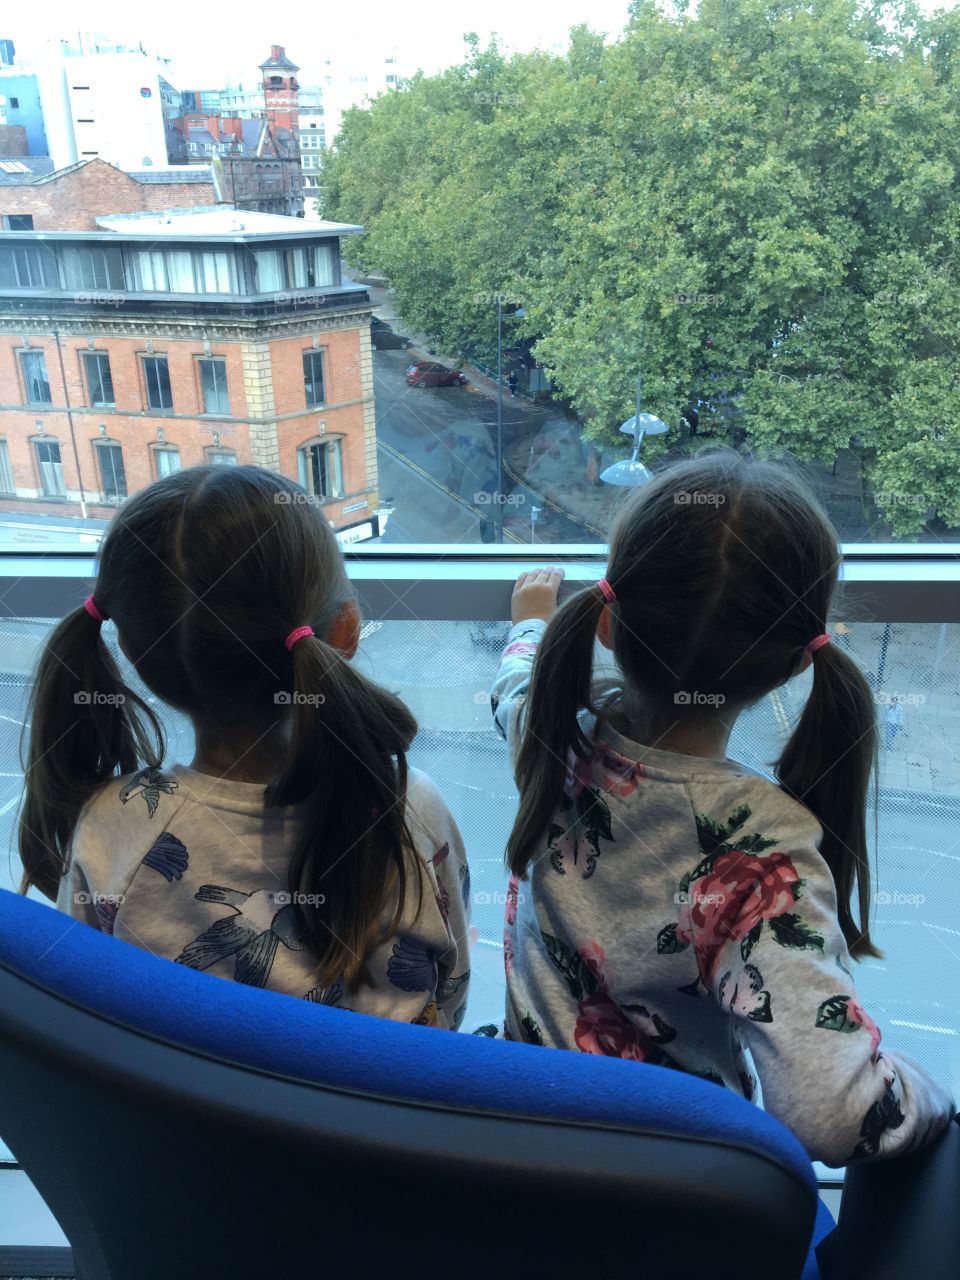 Twin girls looking out onto the giants visiting Liverpool